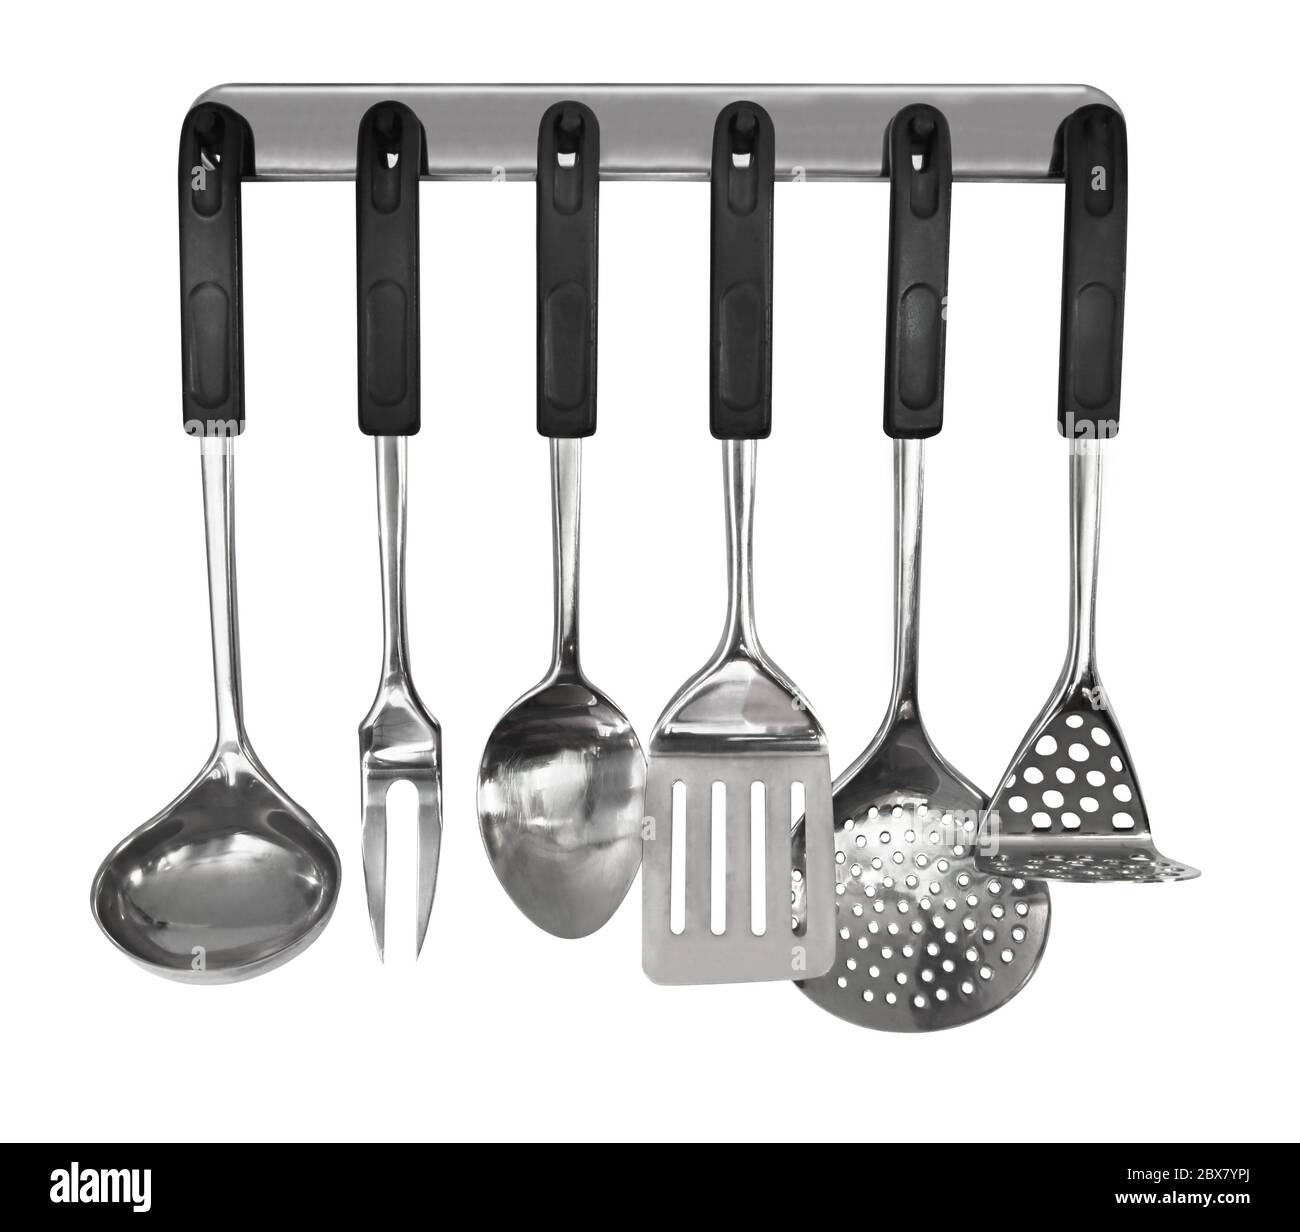 Rack of kitchen utensils, isolated on white.  Stainless steel with black handles. Stock Photo